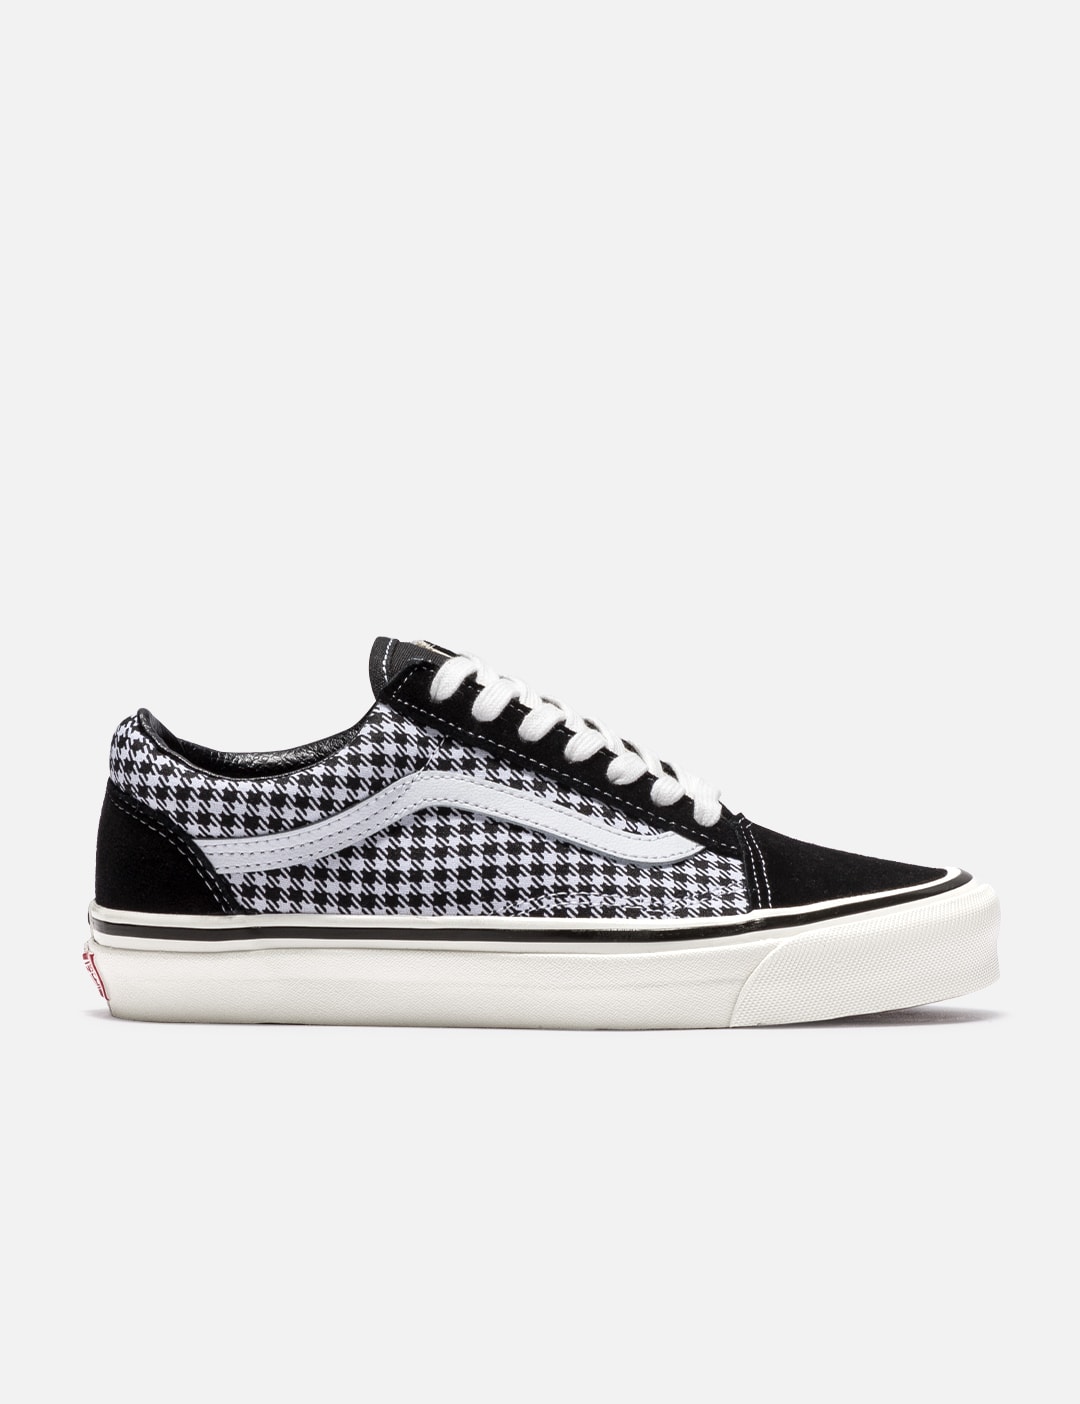 behuizing conversie negeren Vans - Anaheim Factory Old Skool 36 DX | HBX - Globally Curated Fashion and  Lifestyle by Hypebeast